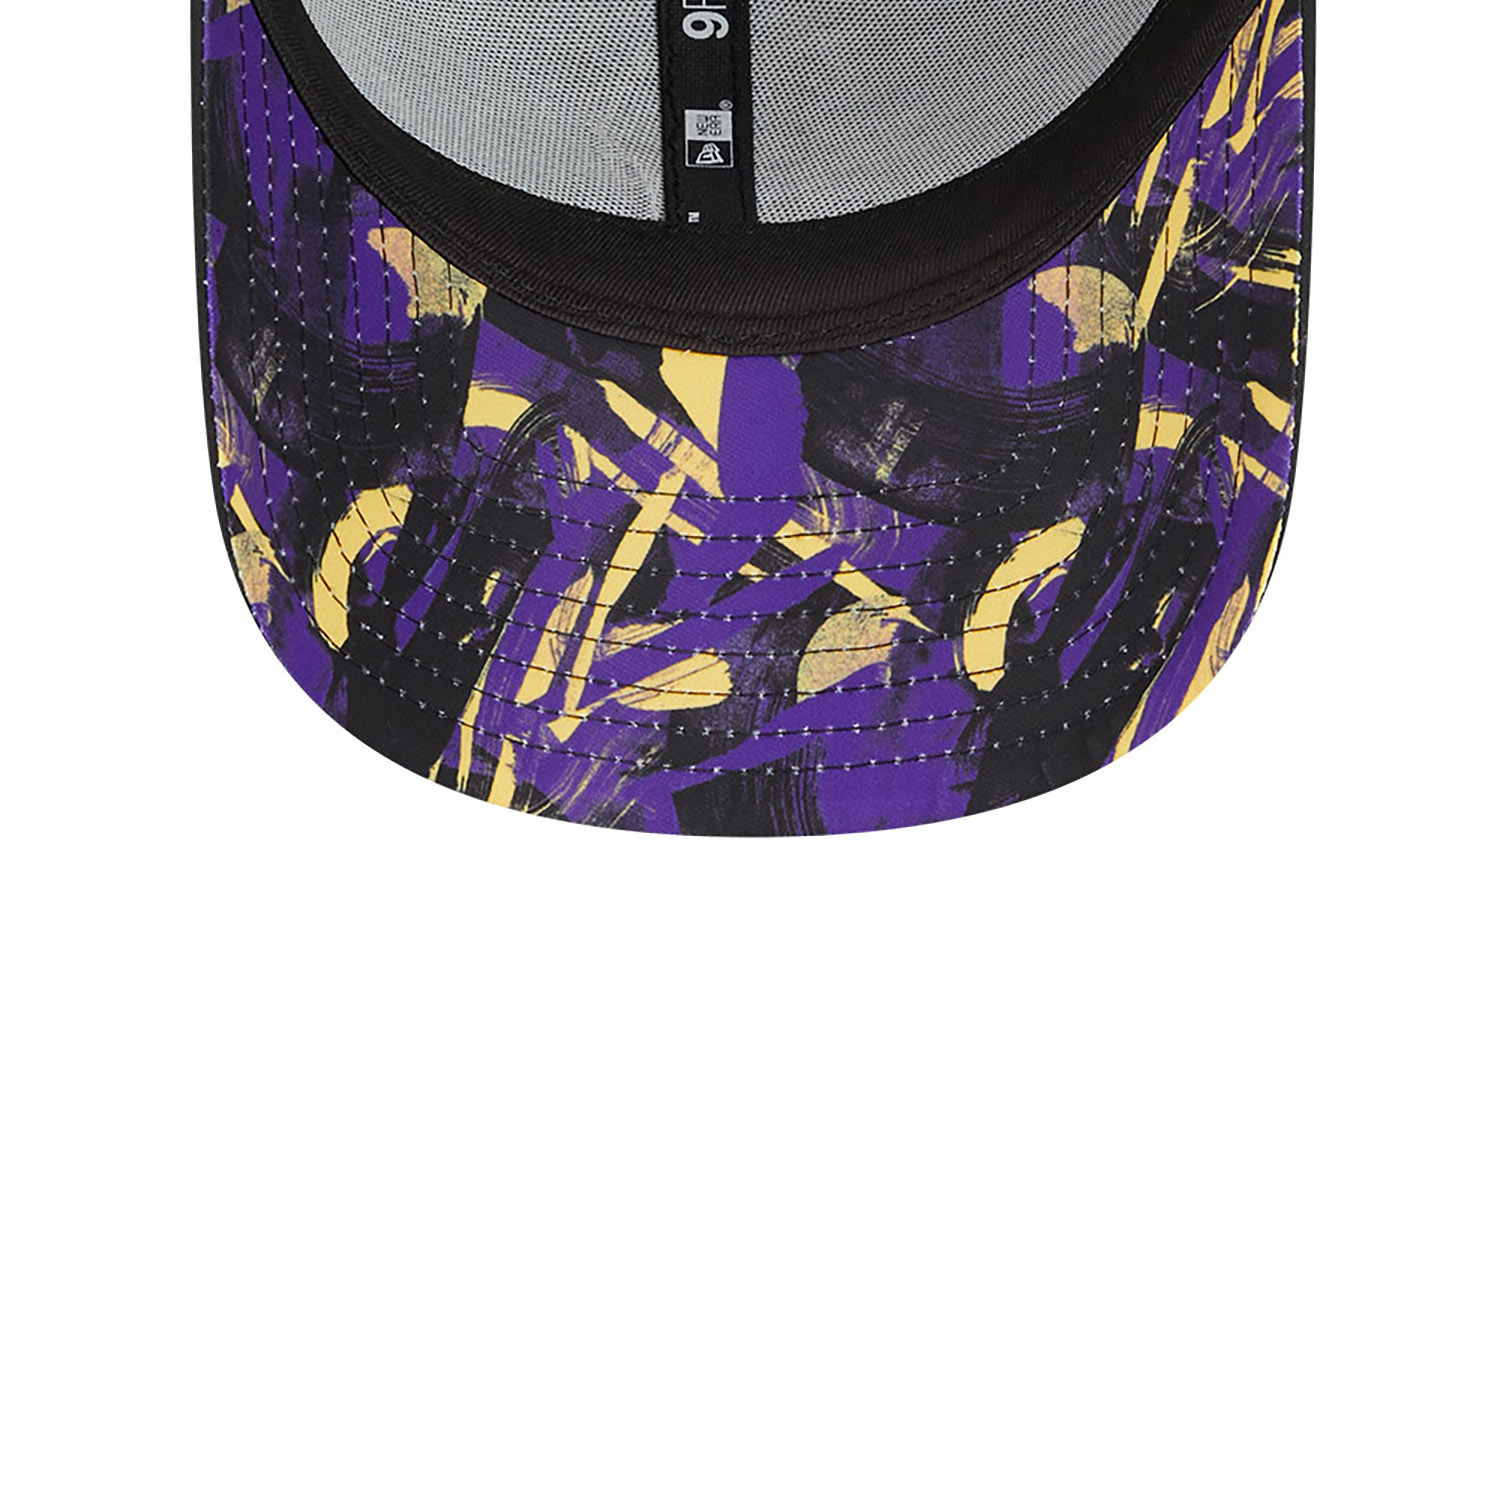 LA Lakers Game Play Black 9FORTY Adjustable Cap